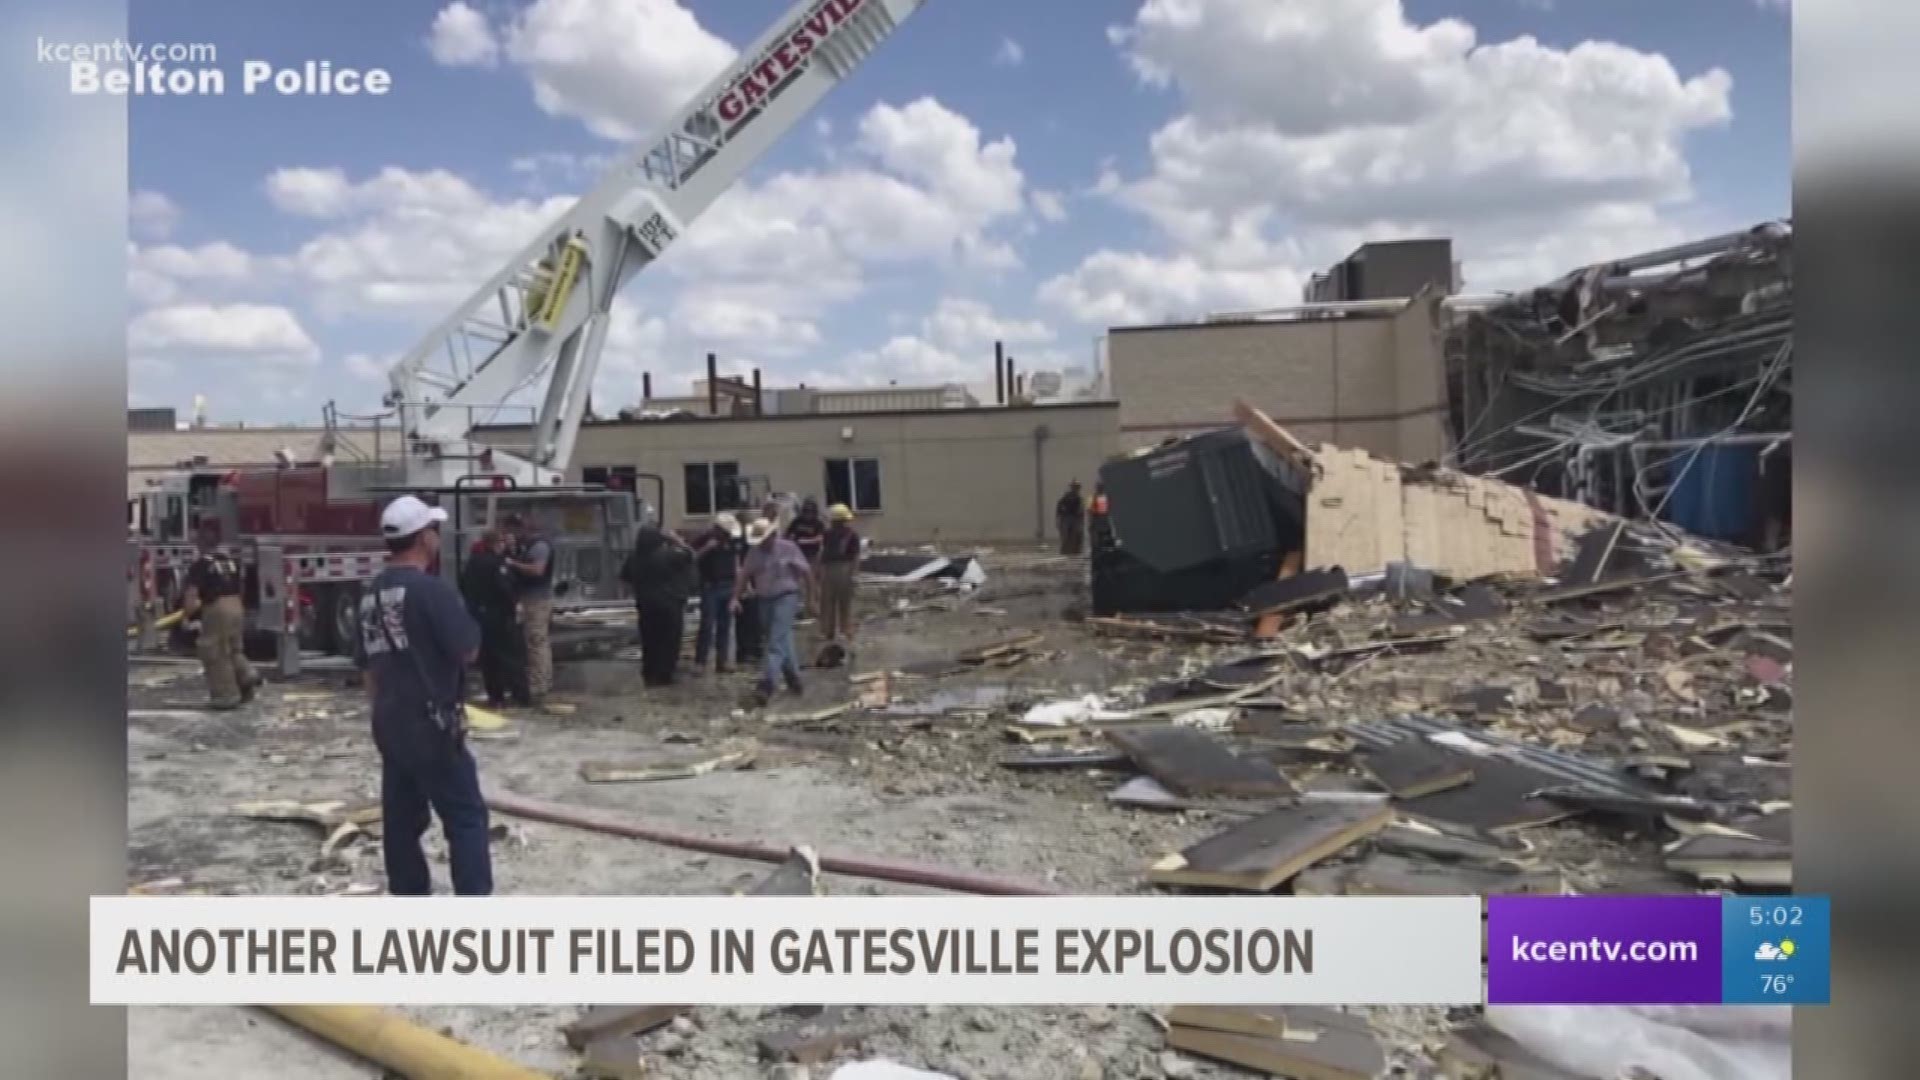 A survivor of the deadly natural gas explosion at Coryell County Memorial Hospital in Gatesville filed a lawsuit against Atmos Energy.